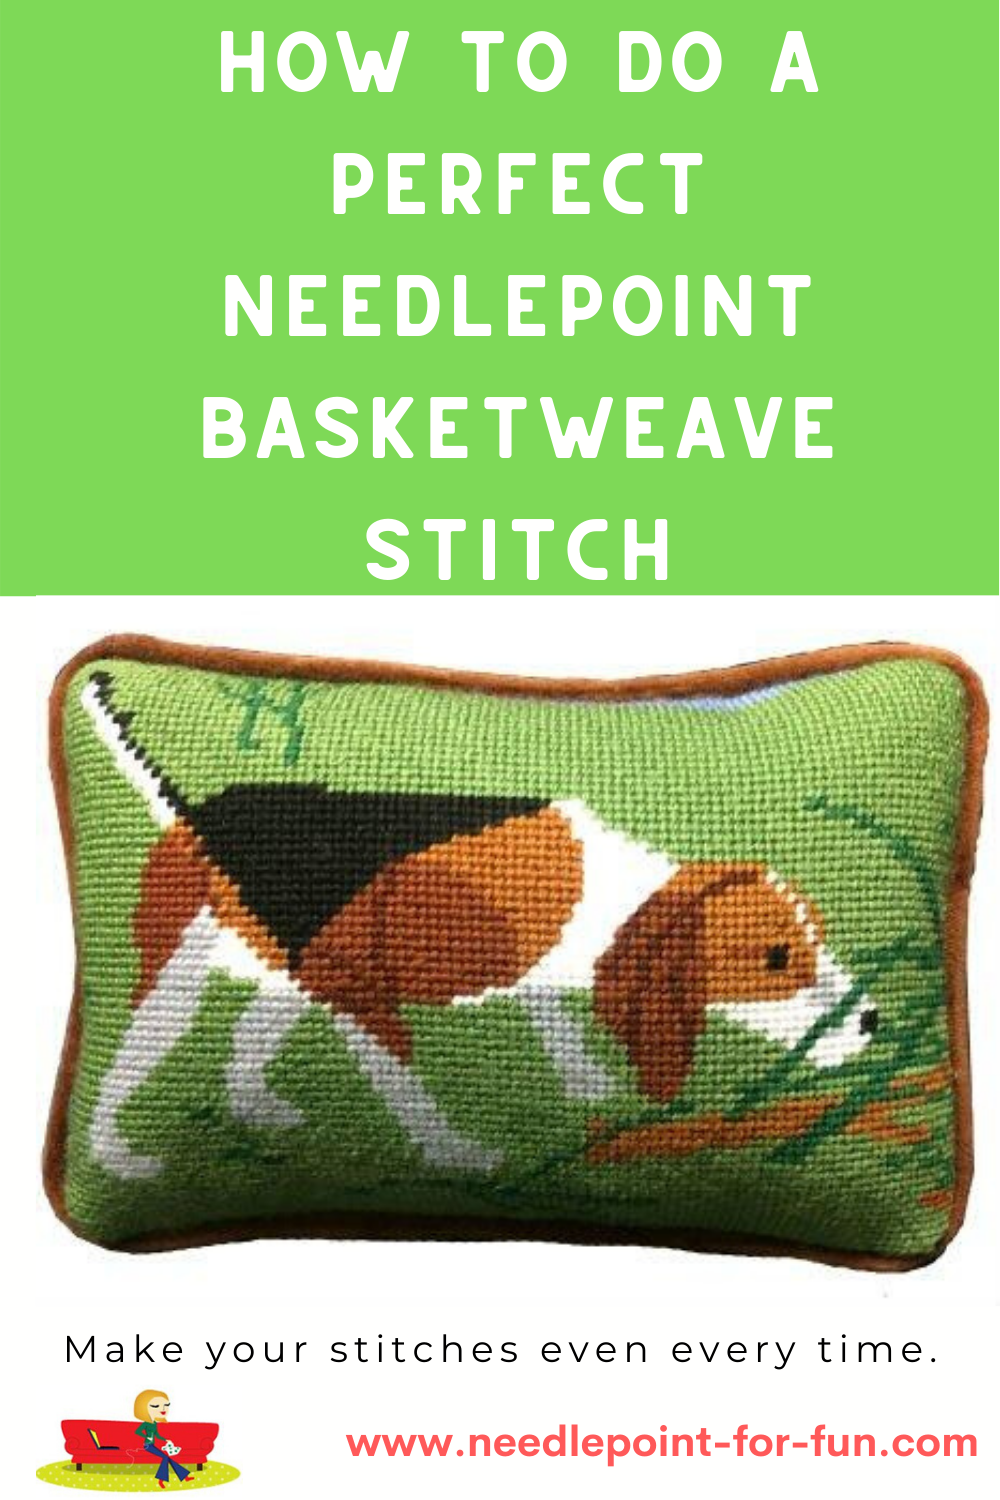 how to do a perfect needlepoint basketweave stitch